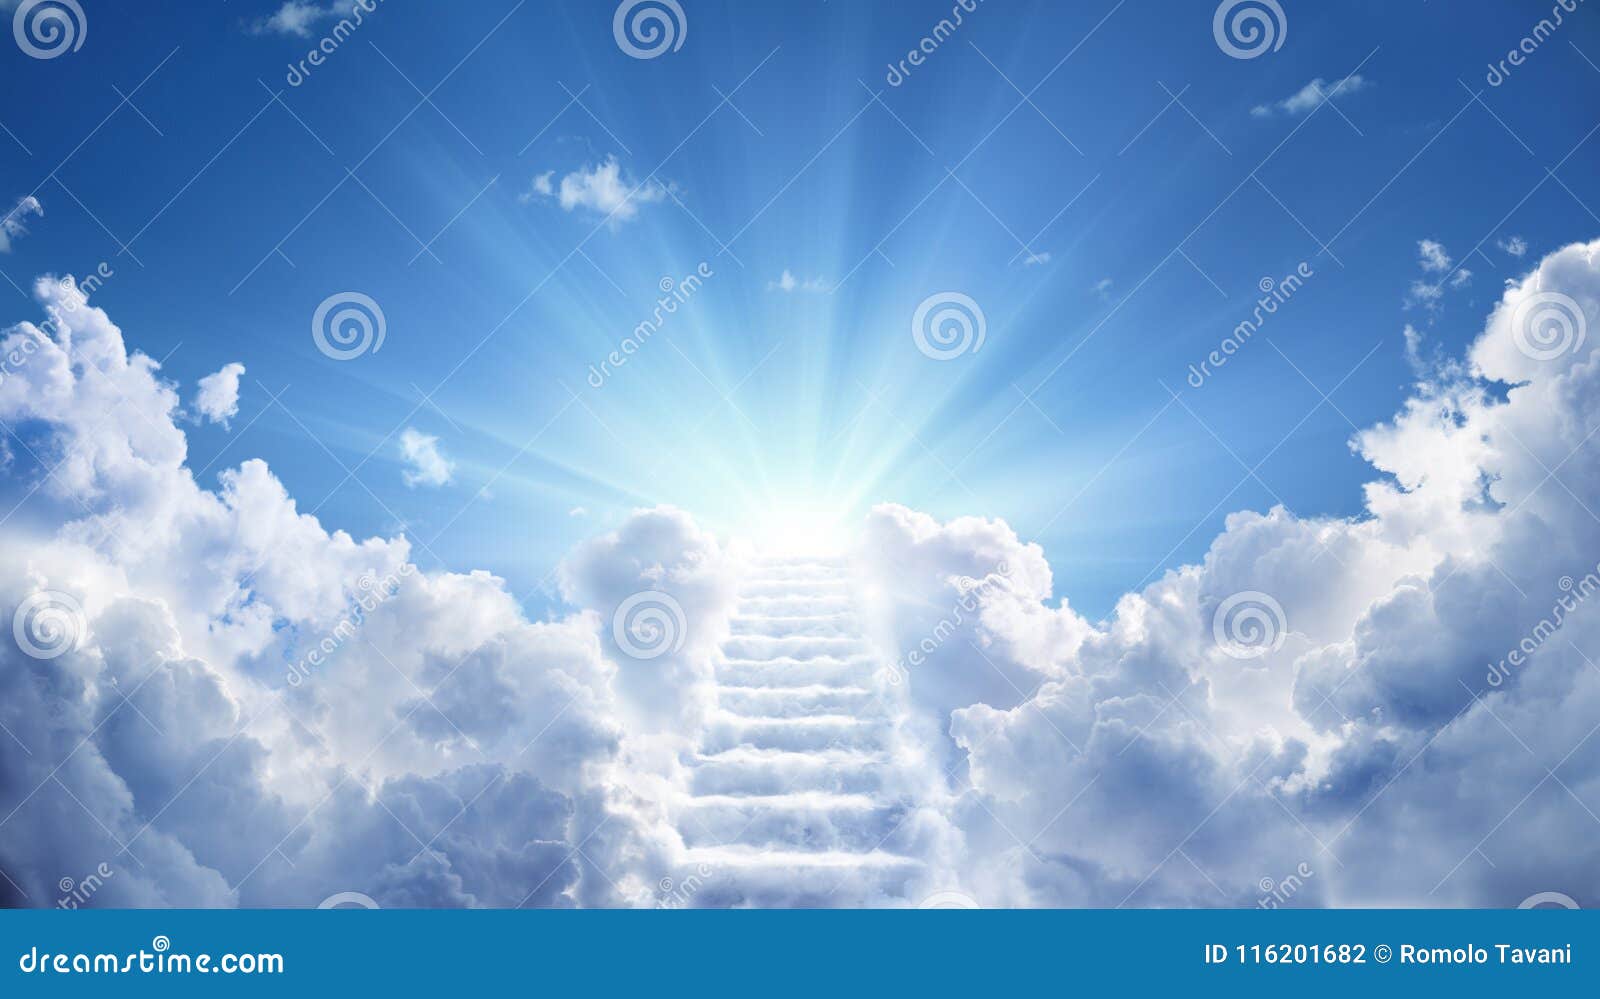 stairway leading up to heavenly sky